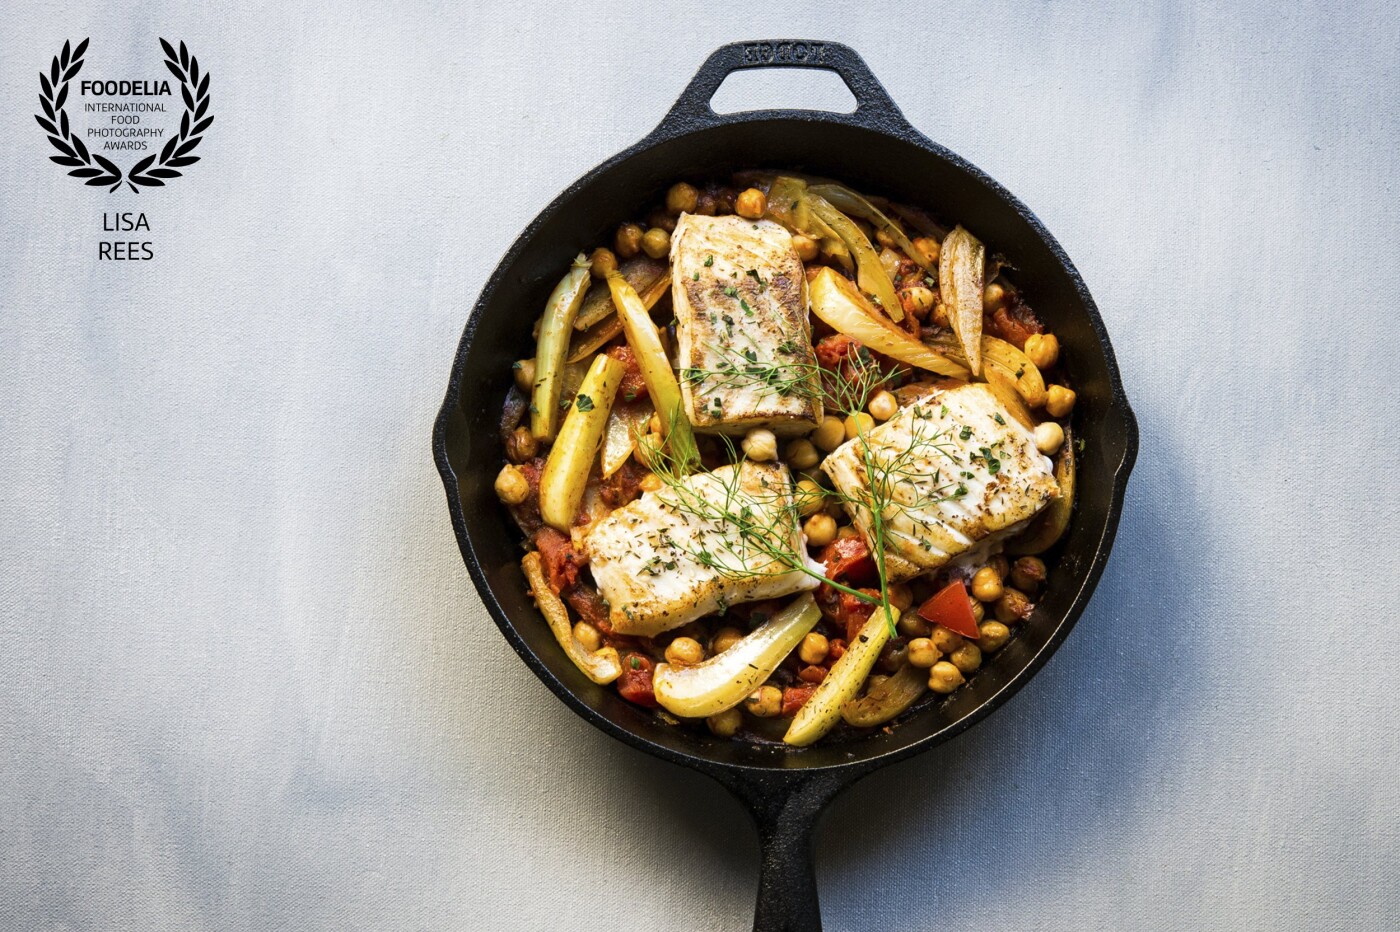 This one-skillet Mediterranean dish showcases some of the wonderful ingredients that I love from the region:  Za'atar spice rubbed halibut fillets pan seared amongst fennel bulb wedges, tomatoes, chickpeas, oregano and a dash of Moschofilero (Greek white wine).